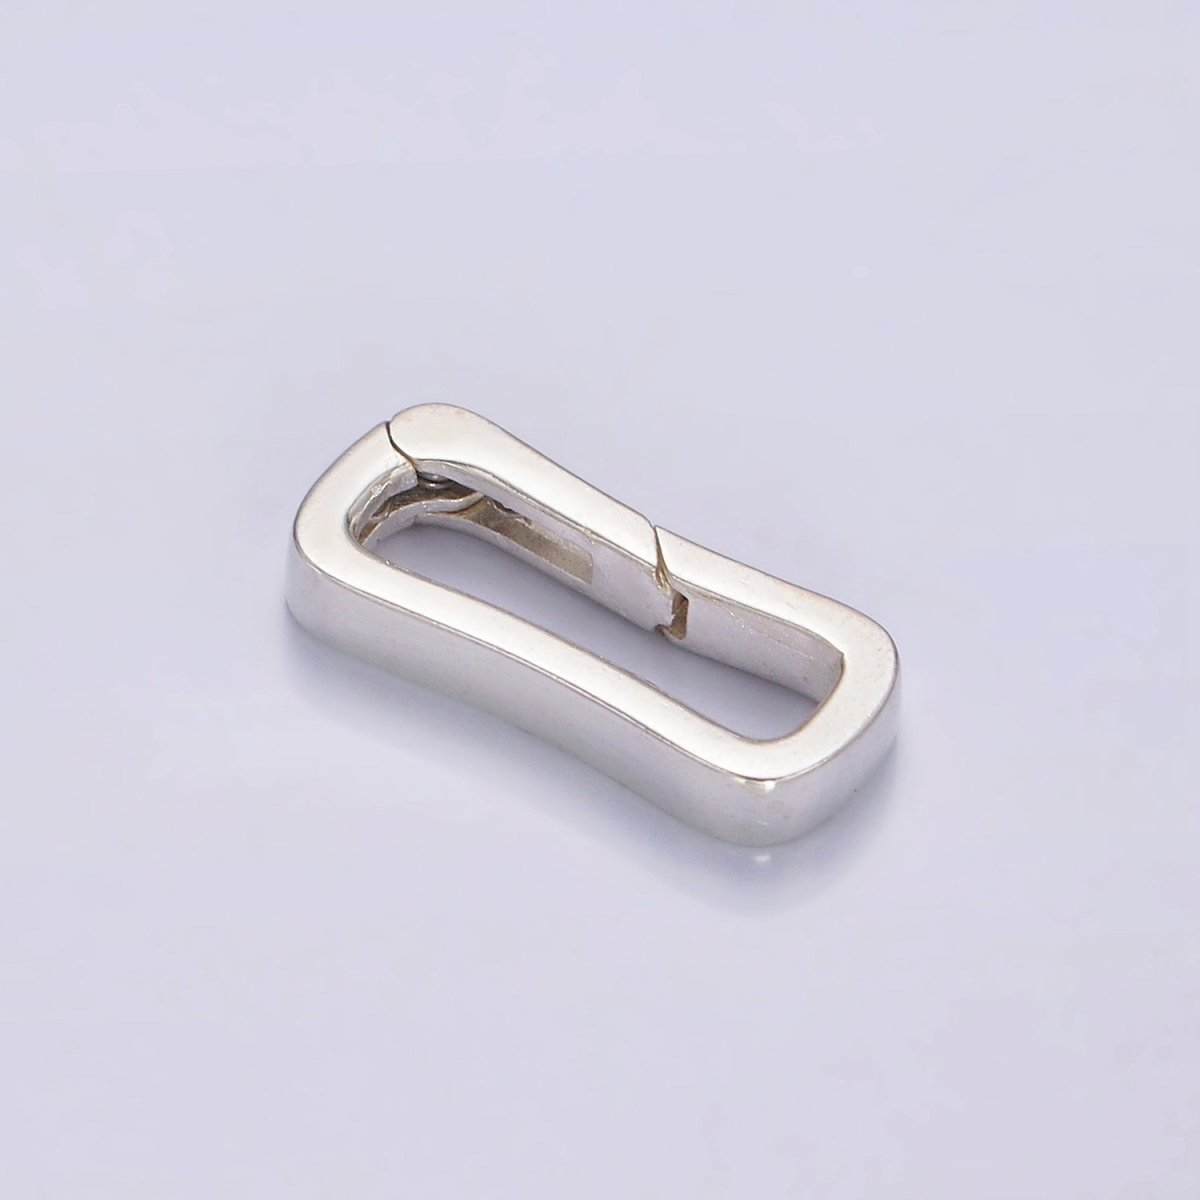 S925 Sterling Silver Rectangle Push Spring Gate Jewelry Findings | SL-473 - DLUXCA